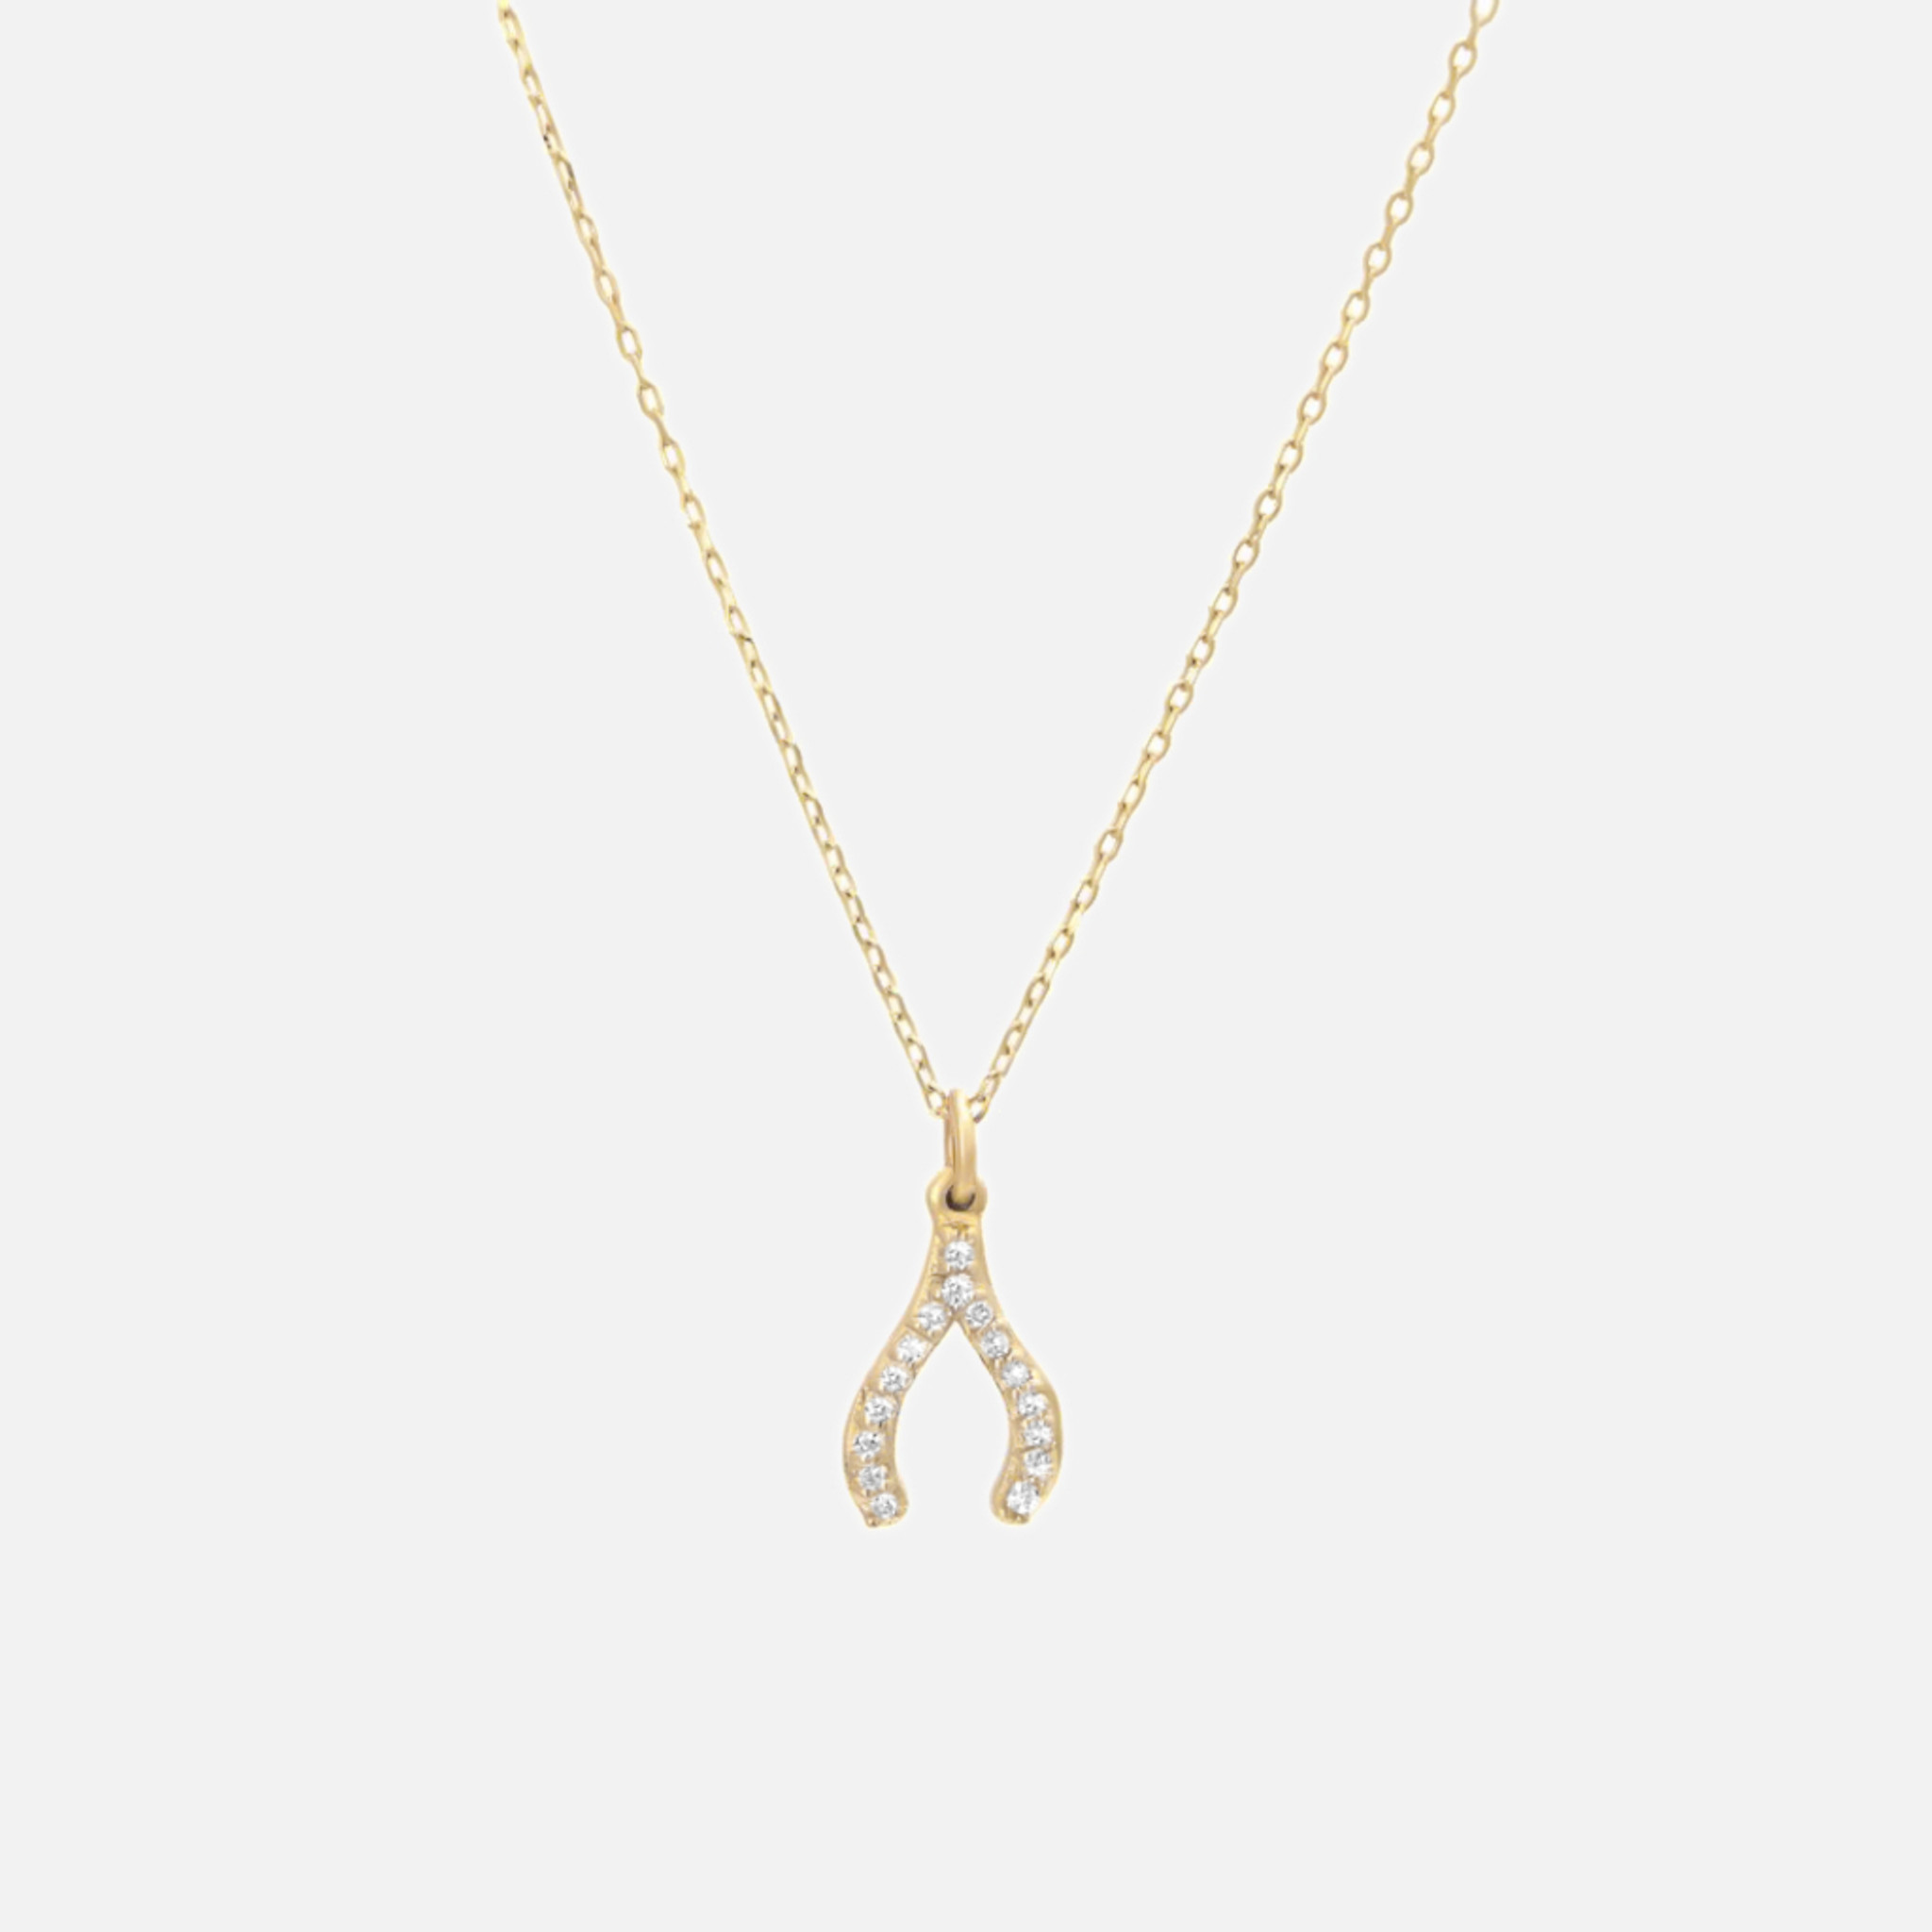 Shiny 14k gold diamond wishbone necklace. Delicate cable chain with single-prong pave diamond lucky bone pendant.